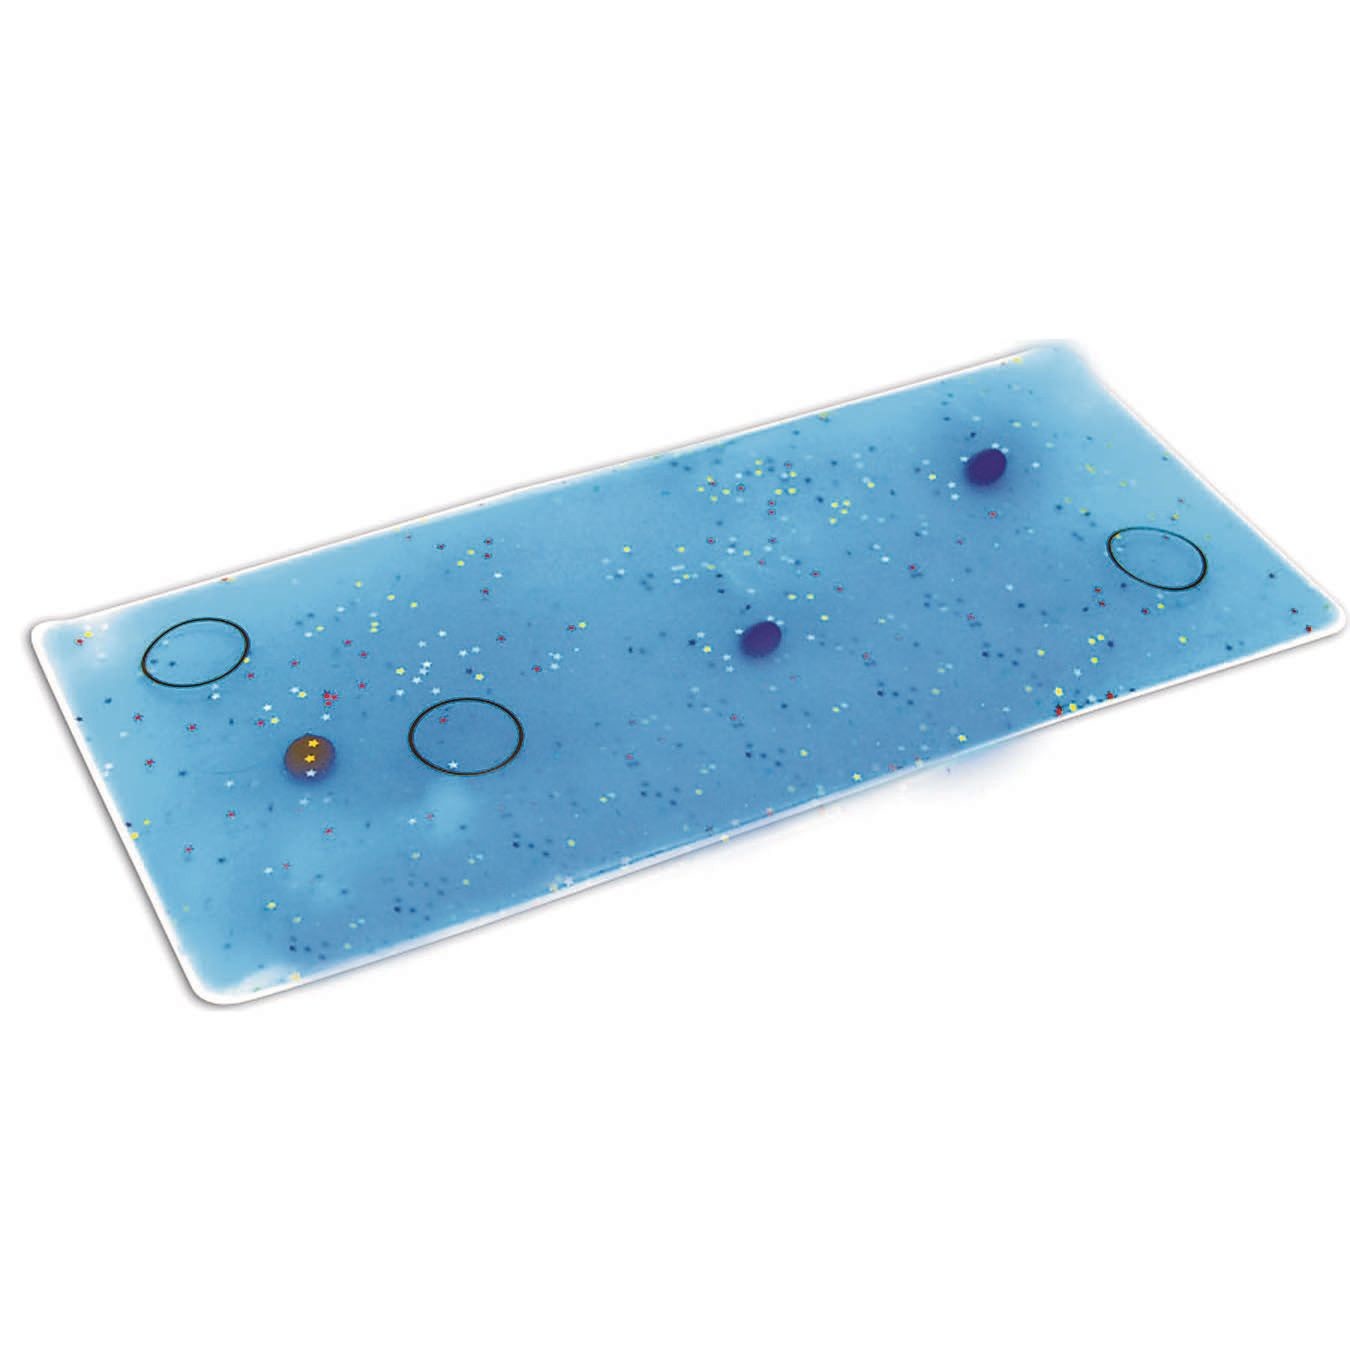 Buy Sensory Stimulation Gel Pad Marbles Worldwide S&S at with